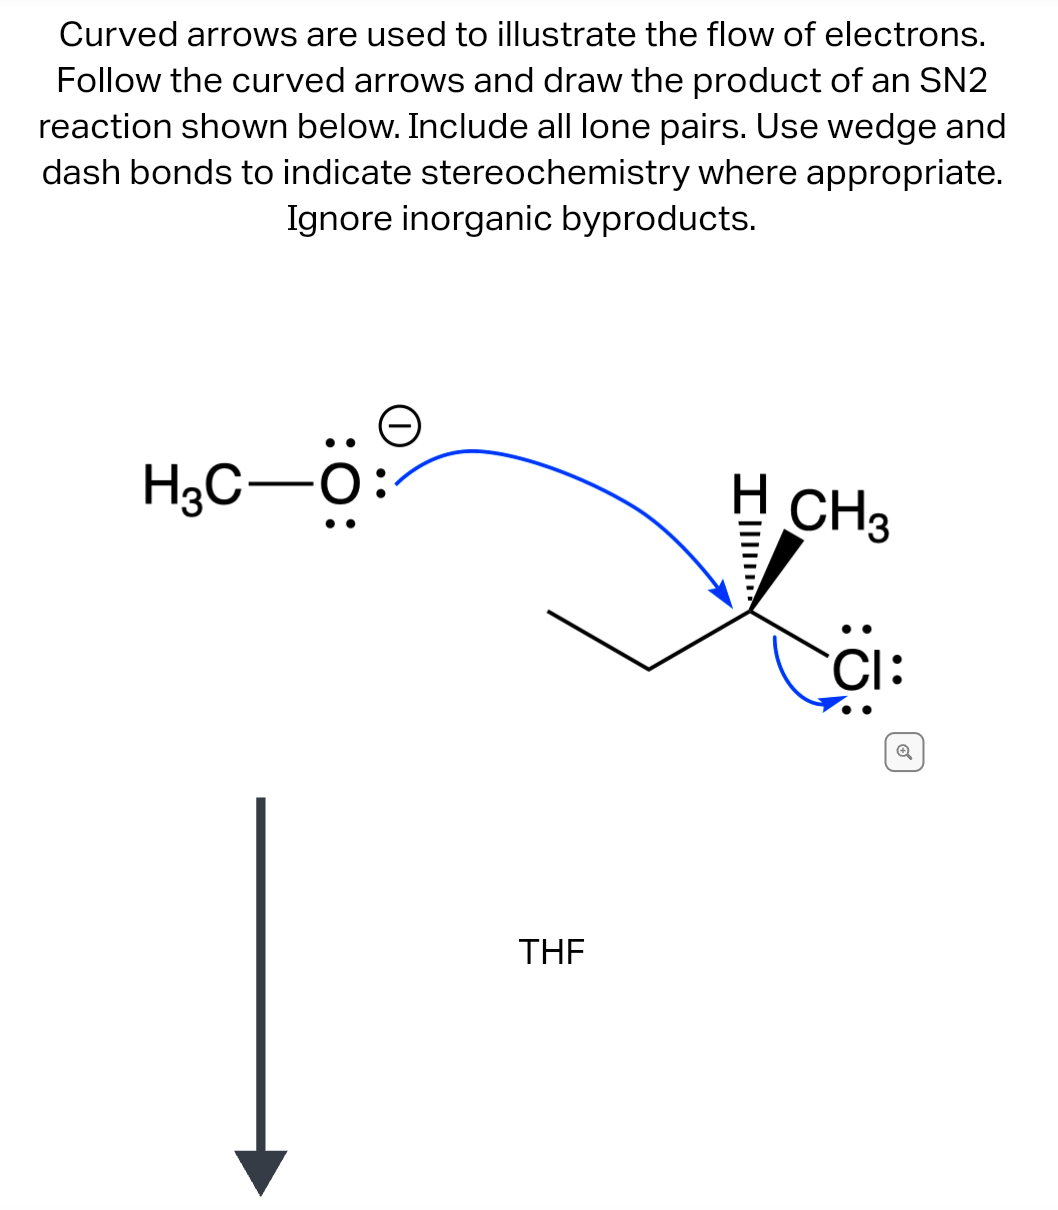 Curved arrows are used to illustrate the flow of electrons.
Follow the curved arrows and draw the product of an SN2
reaction shown below. Include all lone pairs. Use wedge and
dash bonds to indicate stereochemistry where appropriate.
Ignore inorganic byproducts.
H3C-O
THE
IM
CH3
CI: